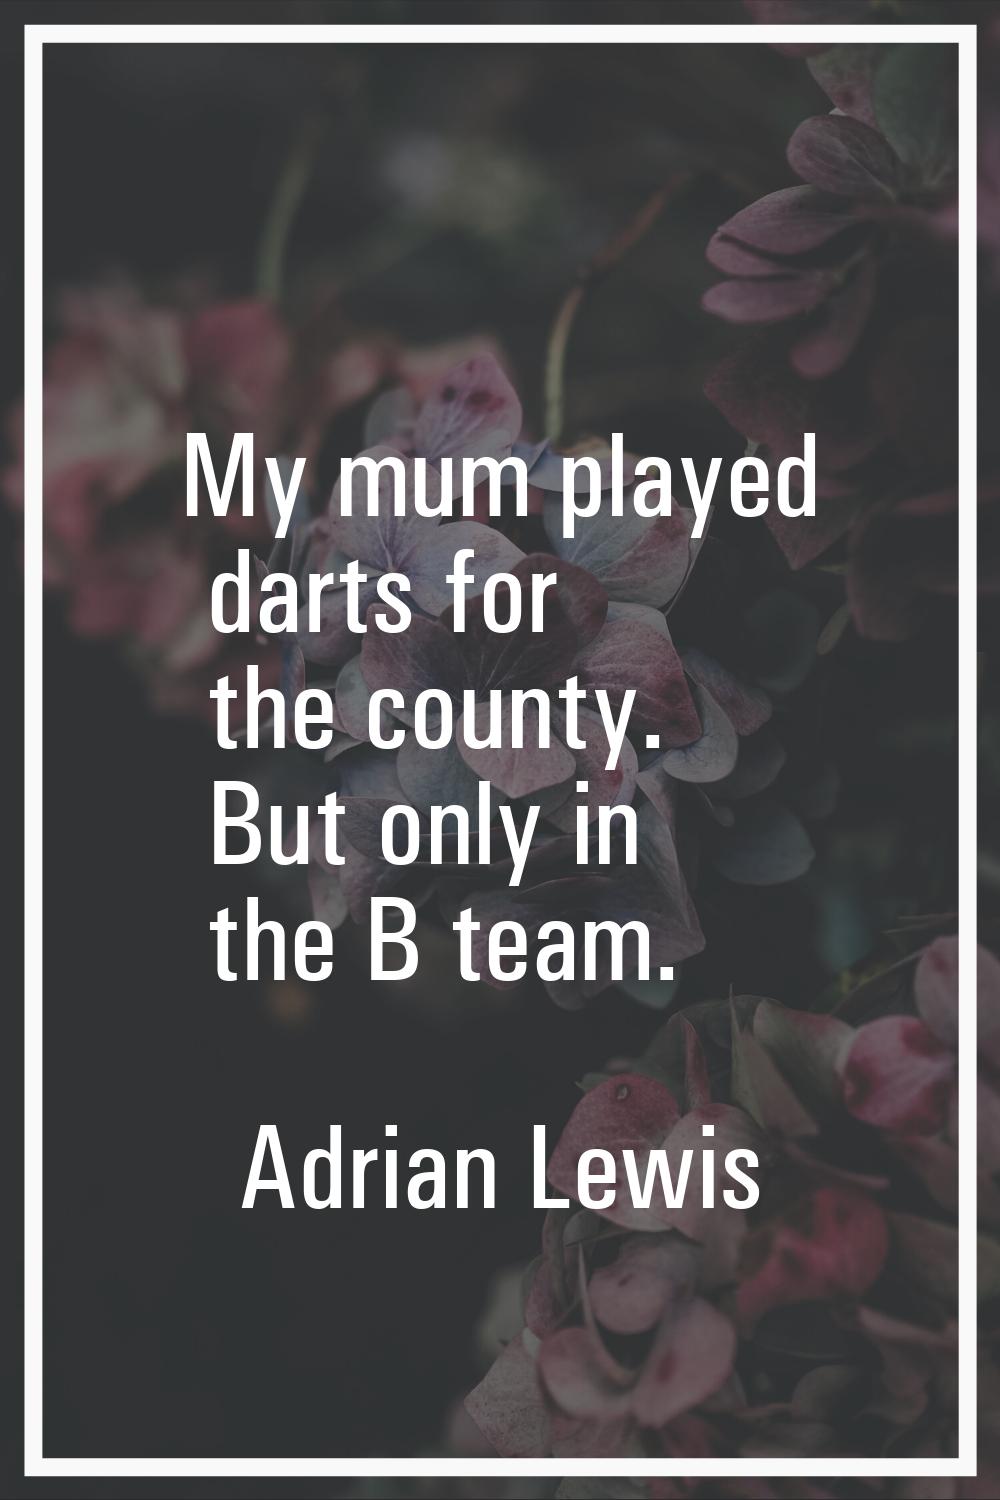 My mum played darts for the county. But only in the B team.